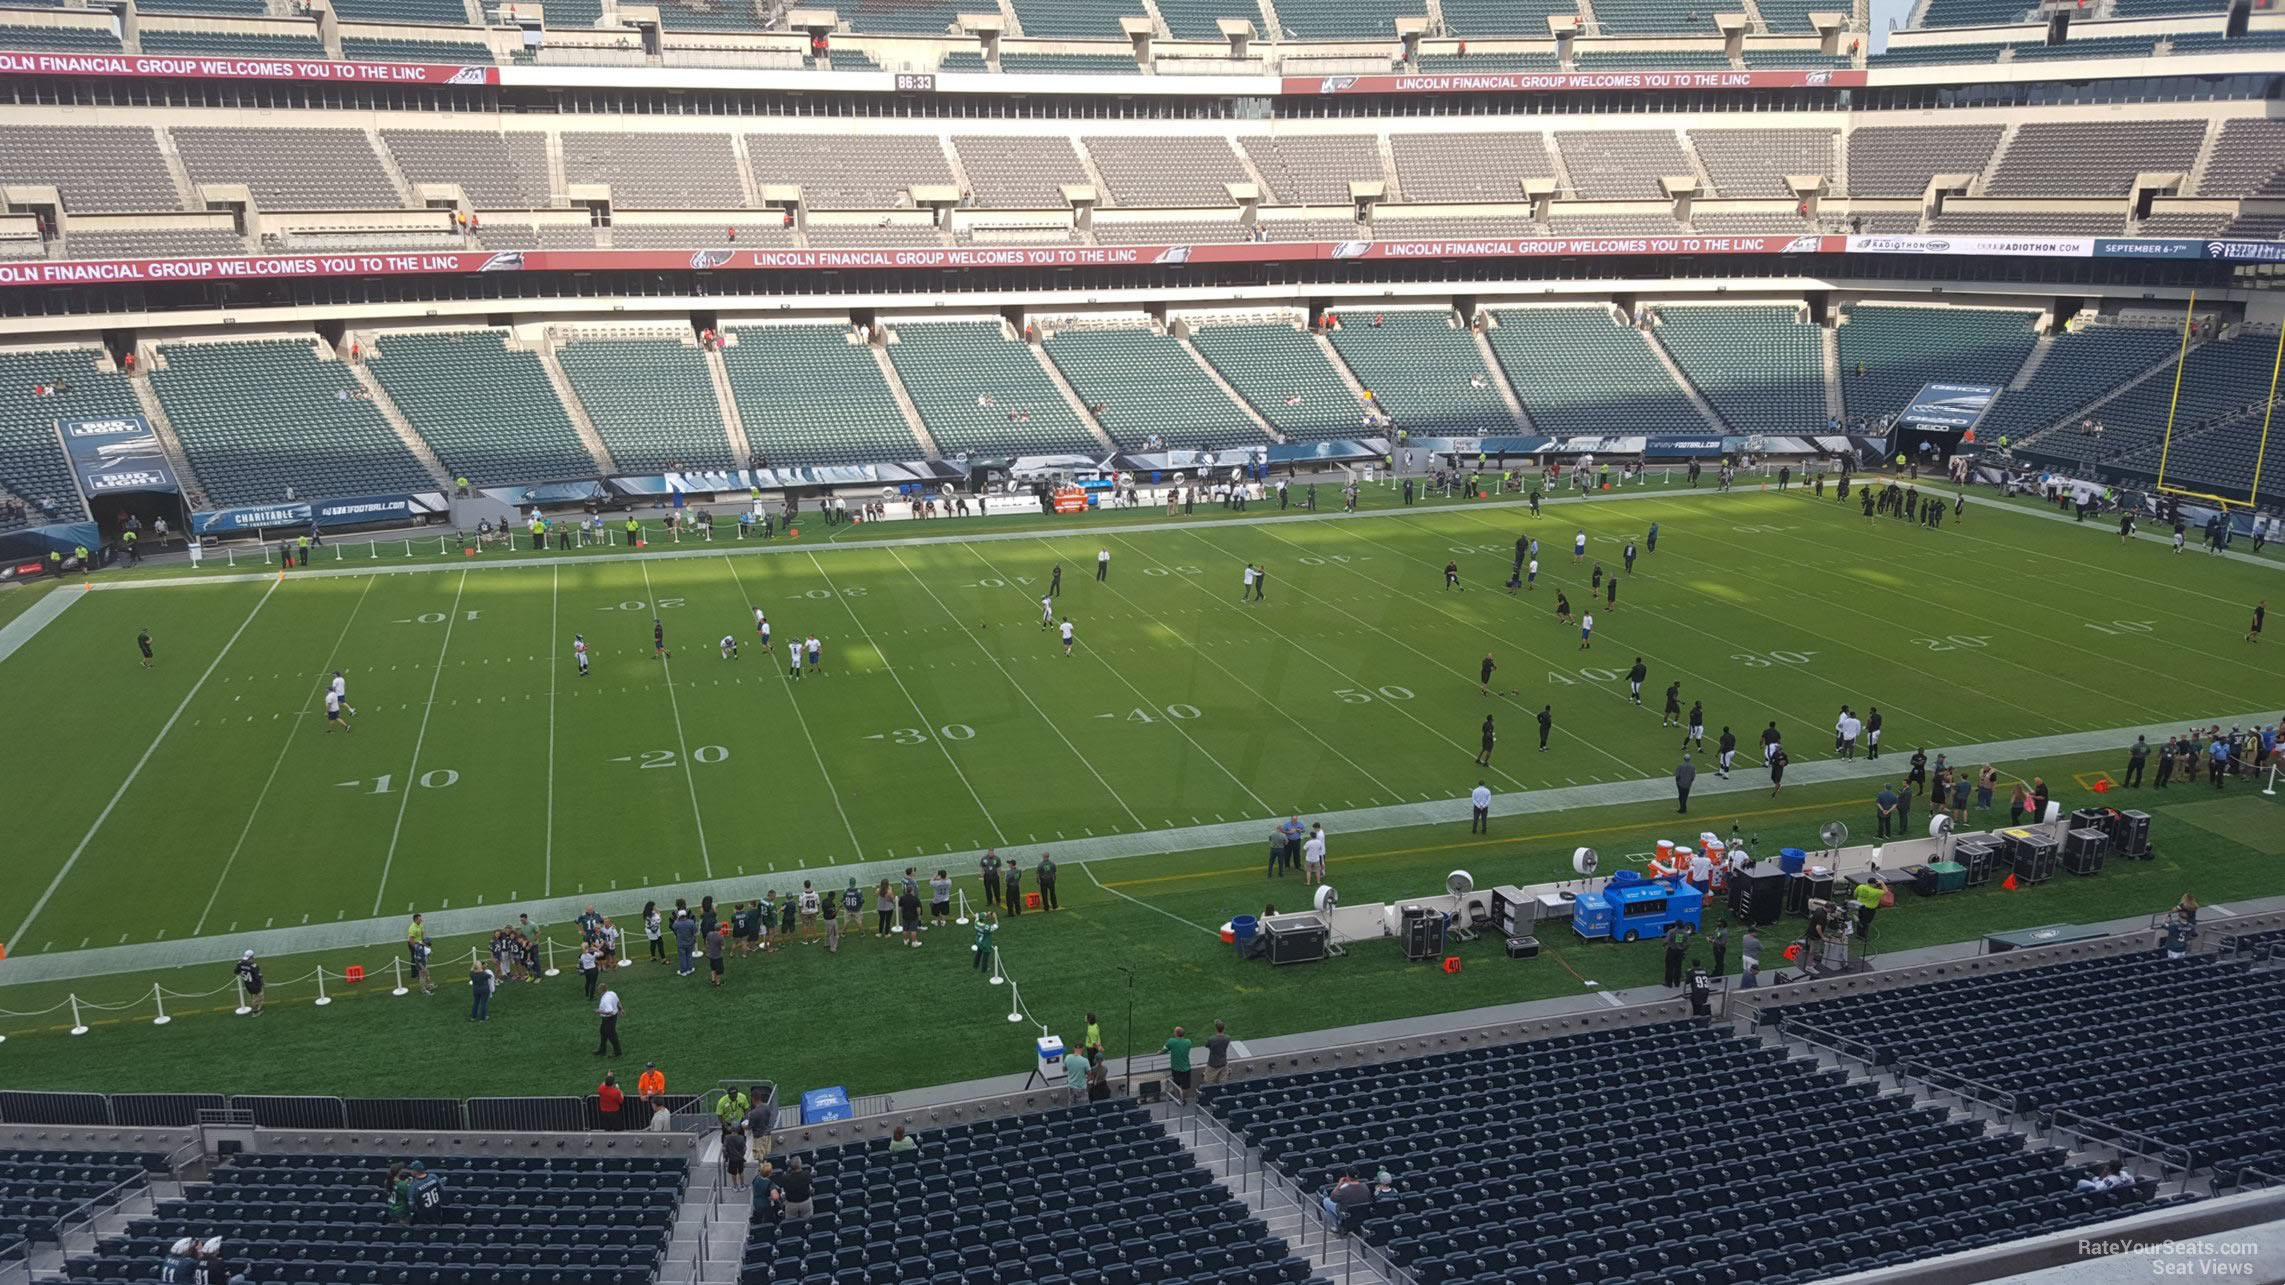 section c38, row 7 seat view  for football - lincoln financial field